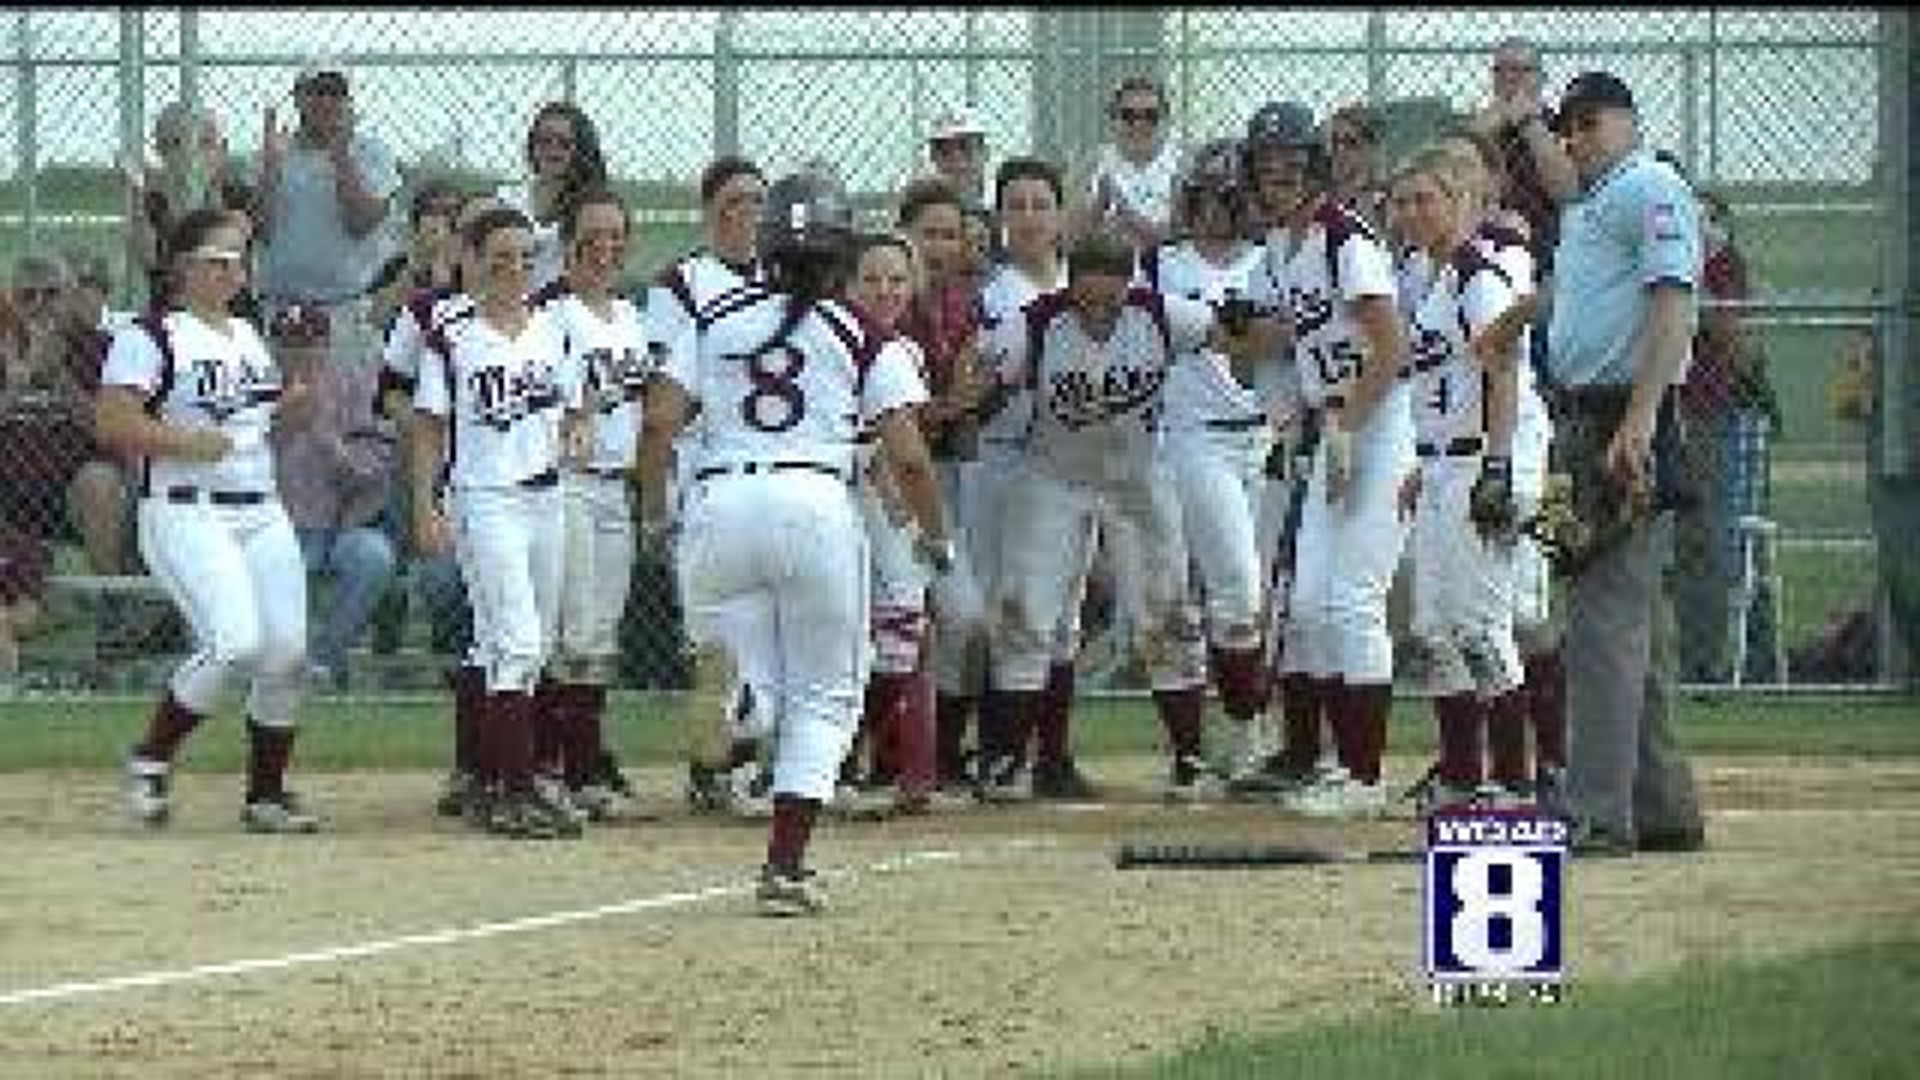 Marion Homers Not Enough for Maroons